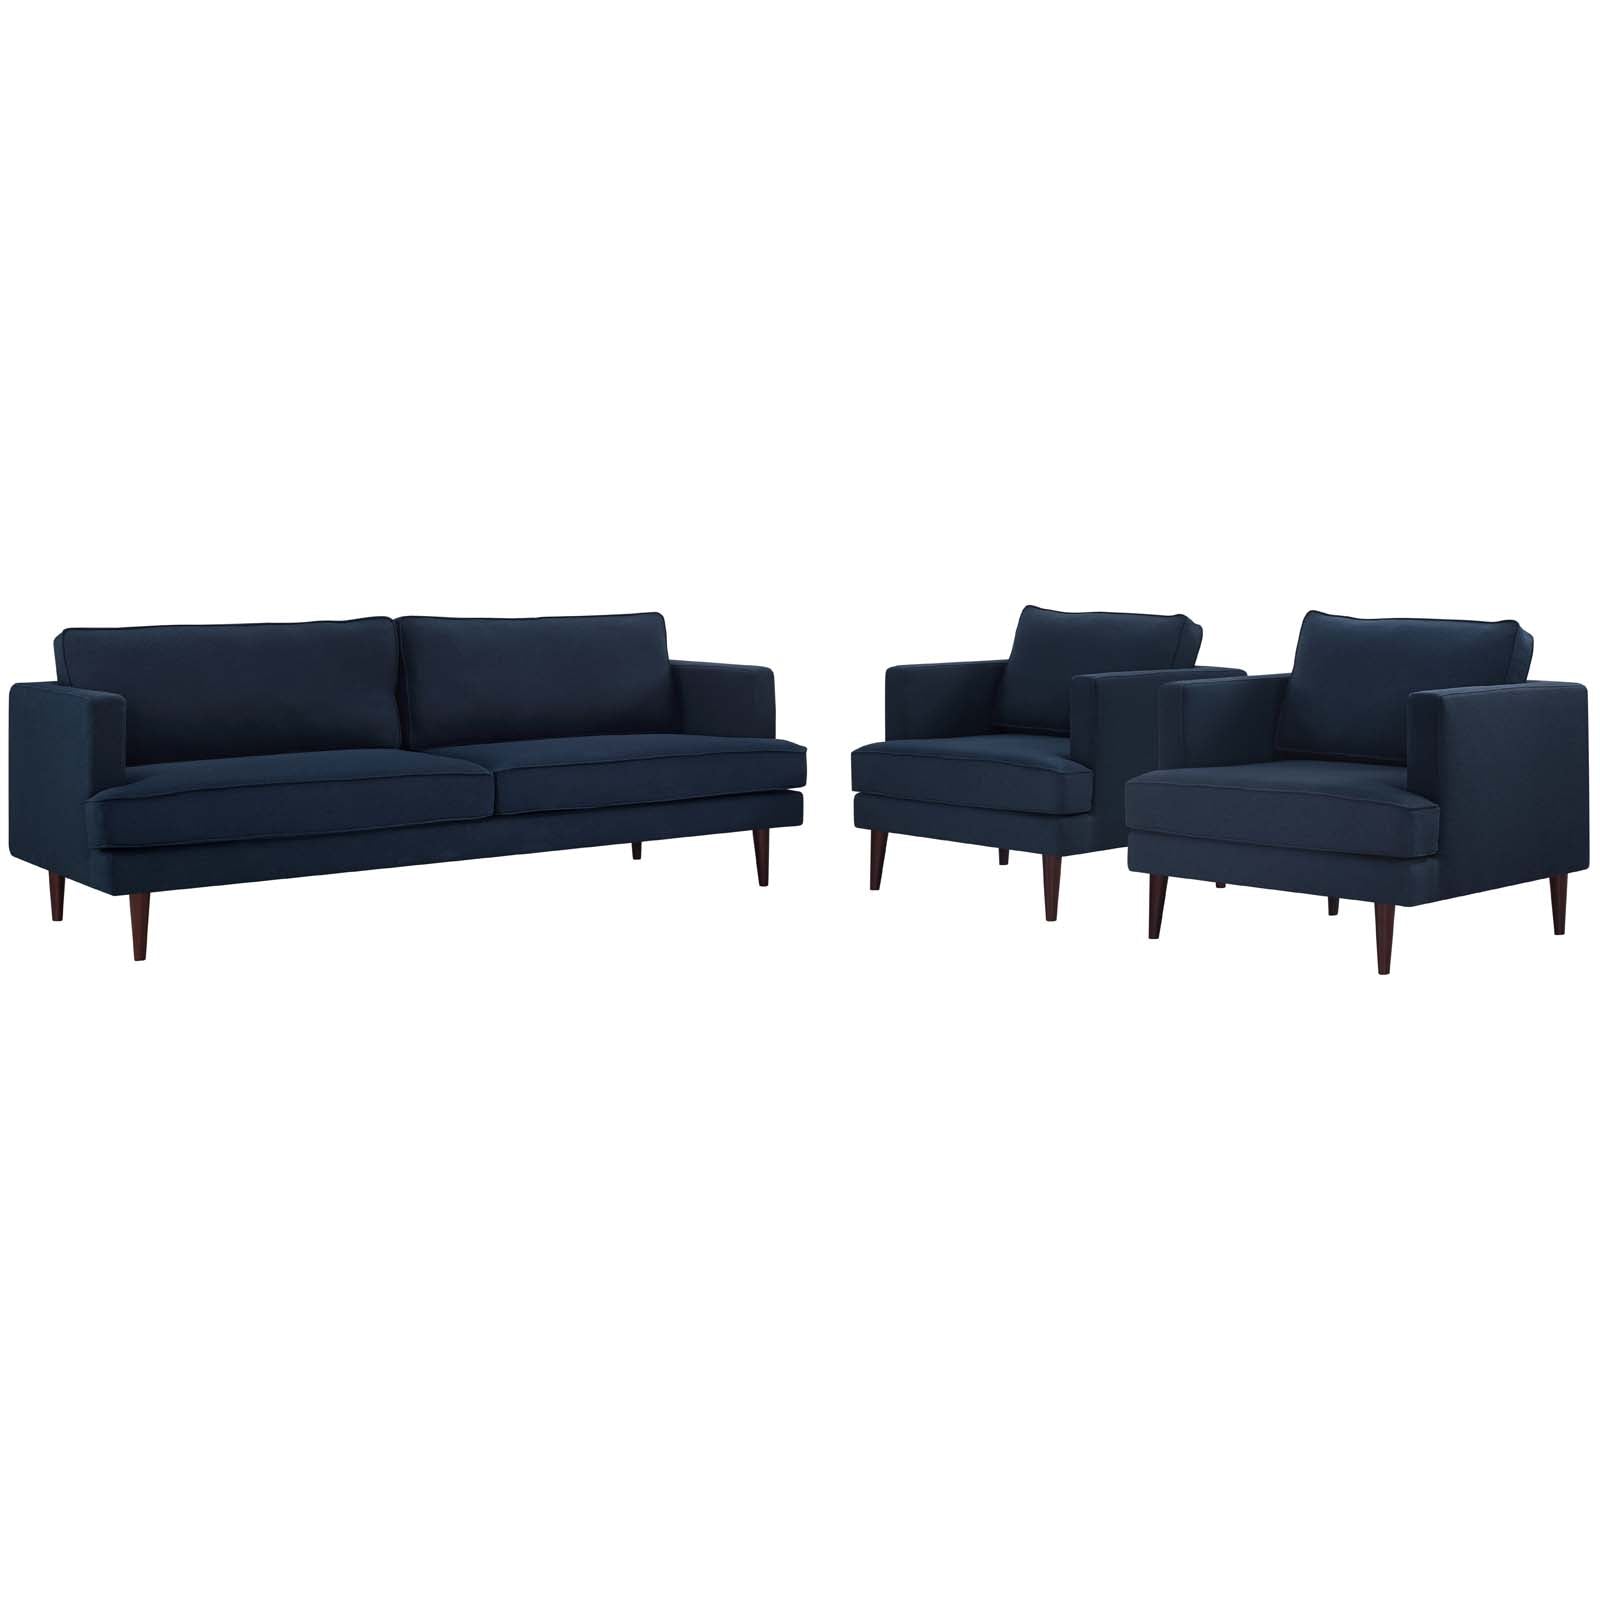 Agile 3 Piece Upholstered Fabric Set - East Shore Modern Home Furnishings